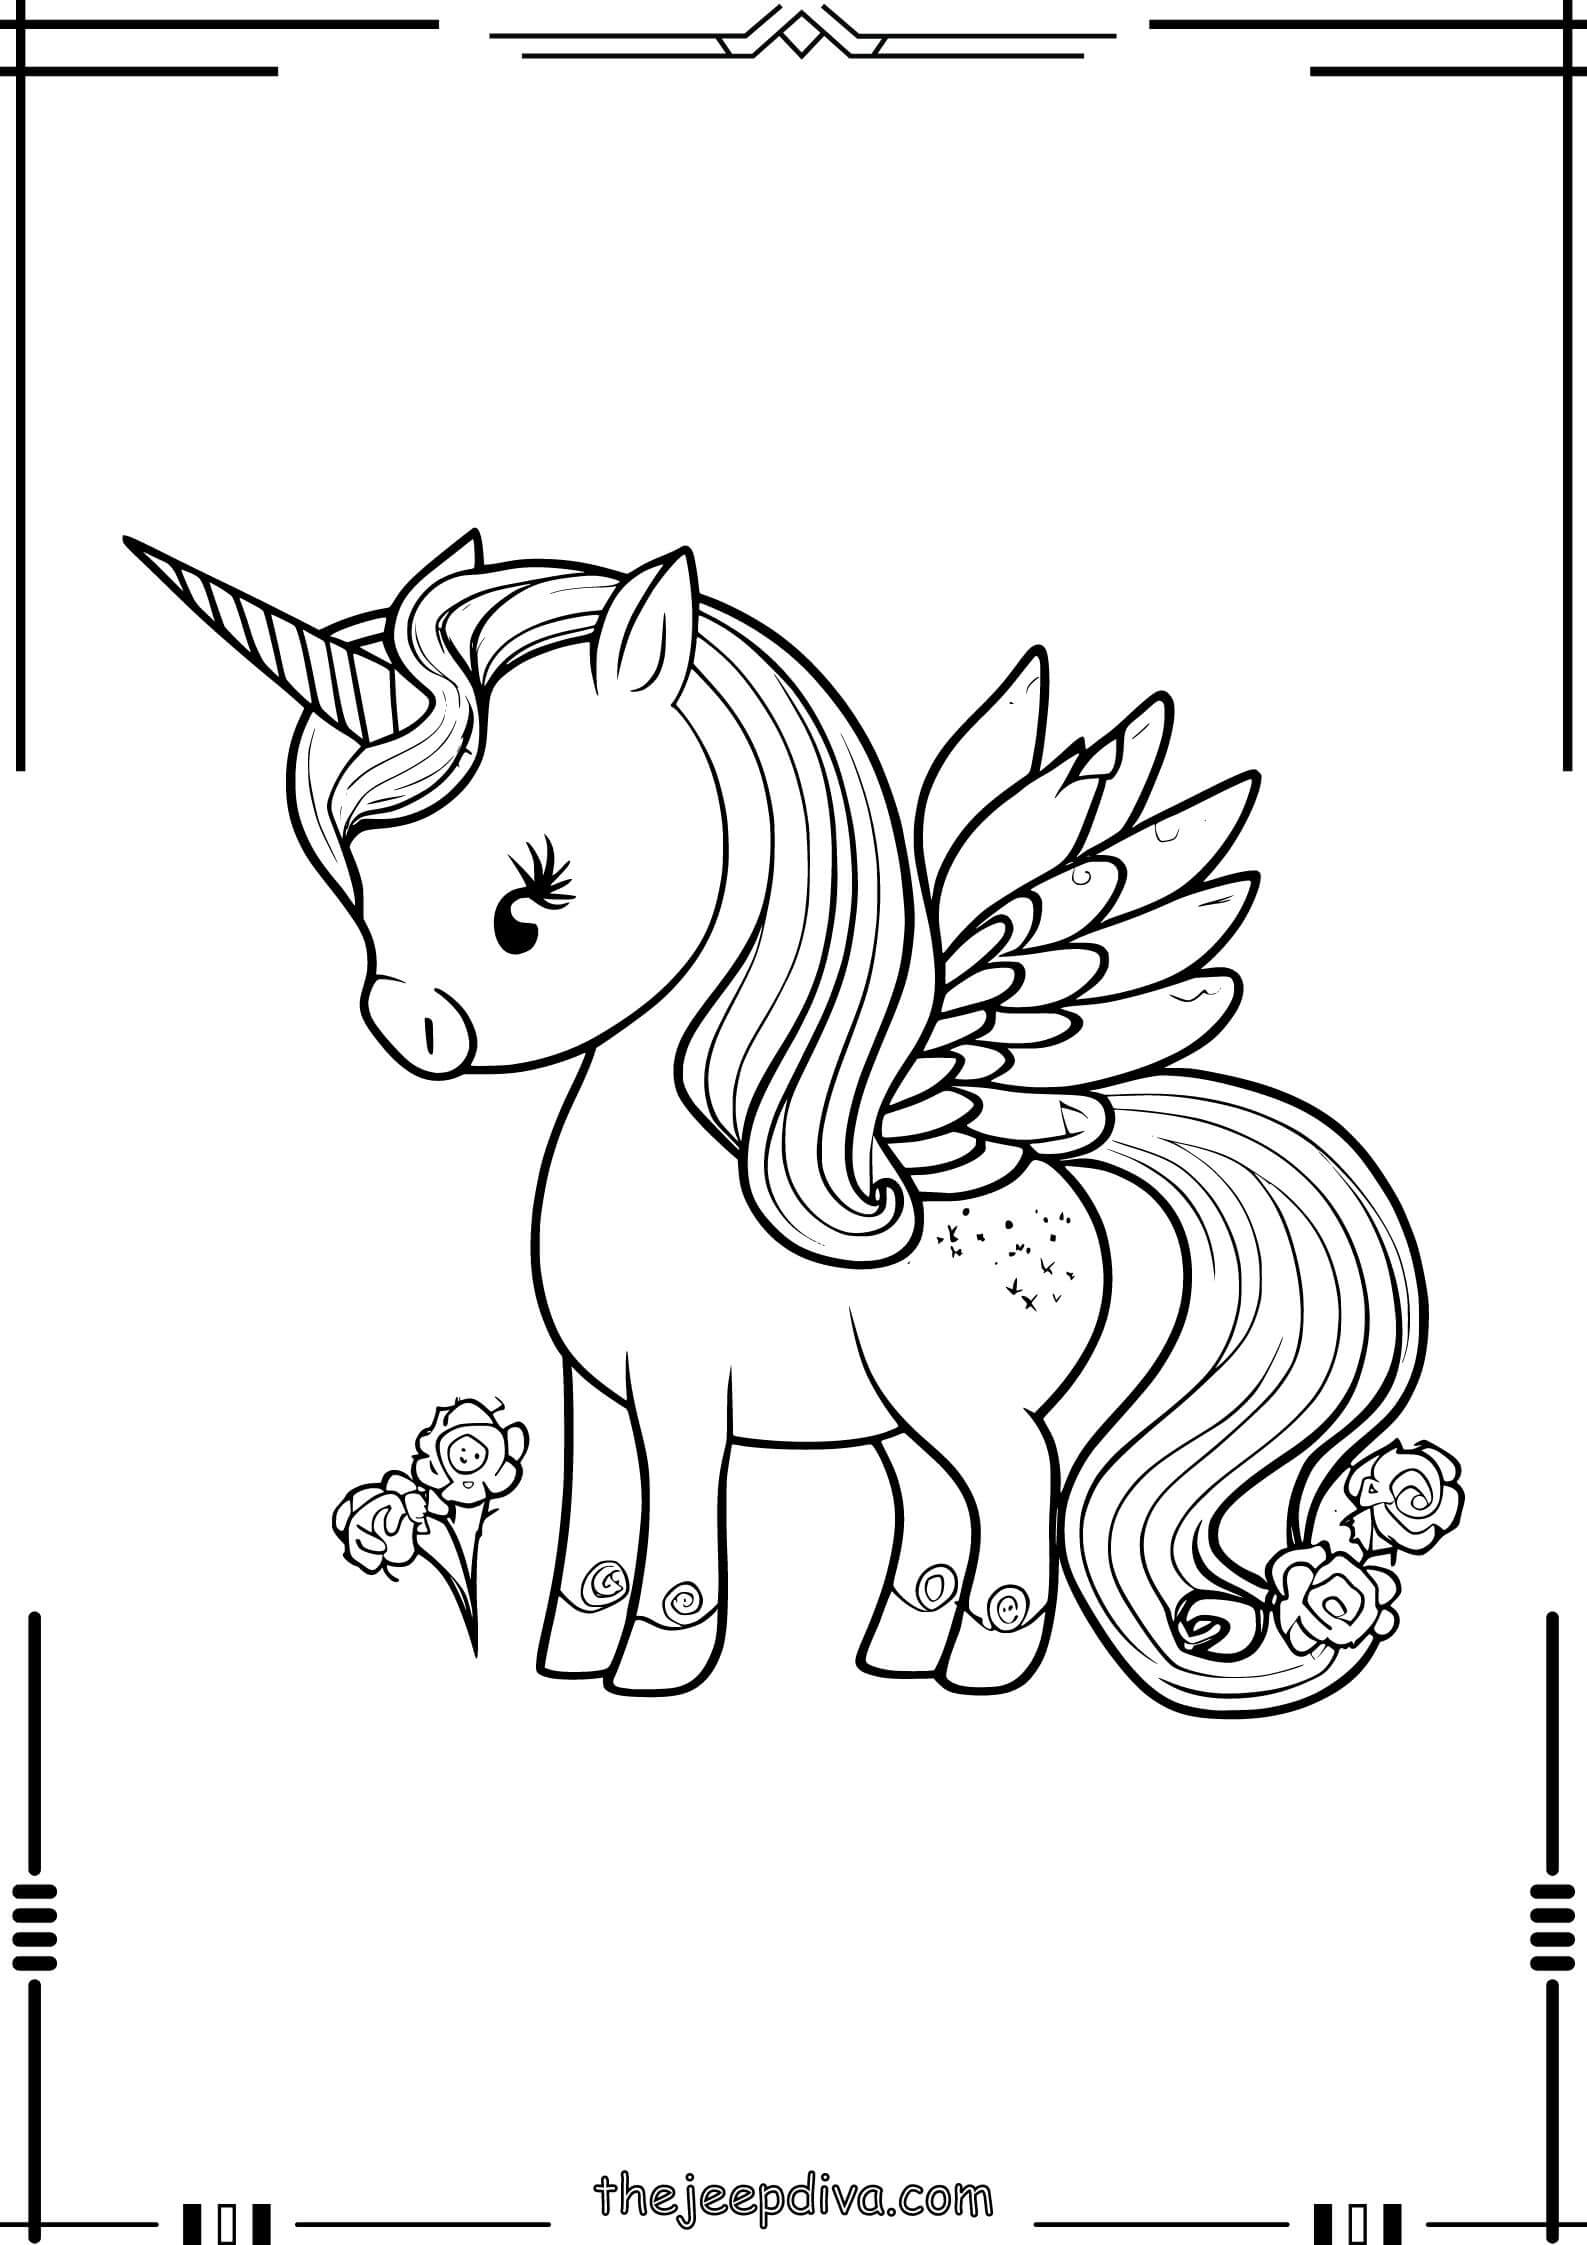 unicorn-coloring-page-easy-10